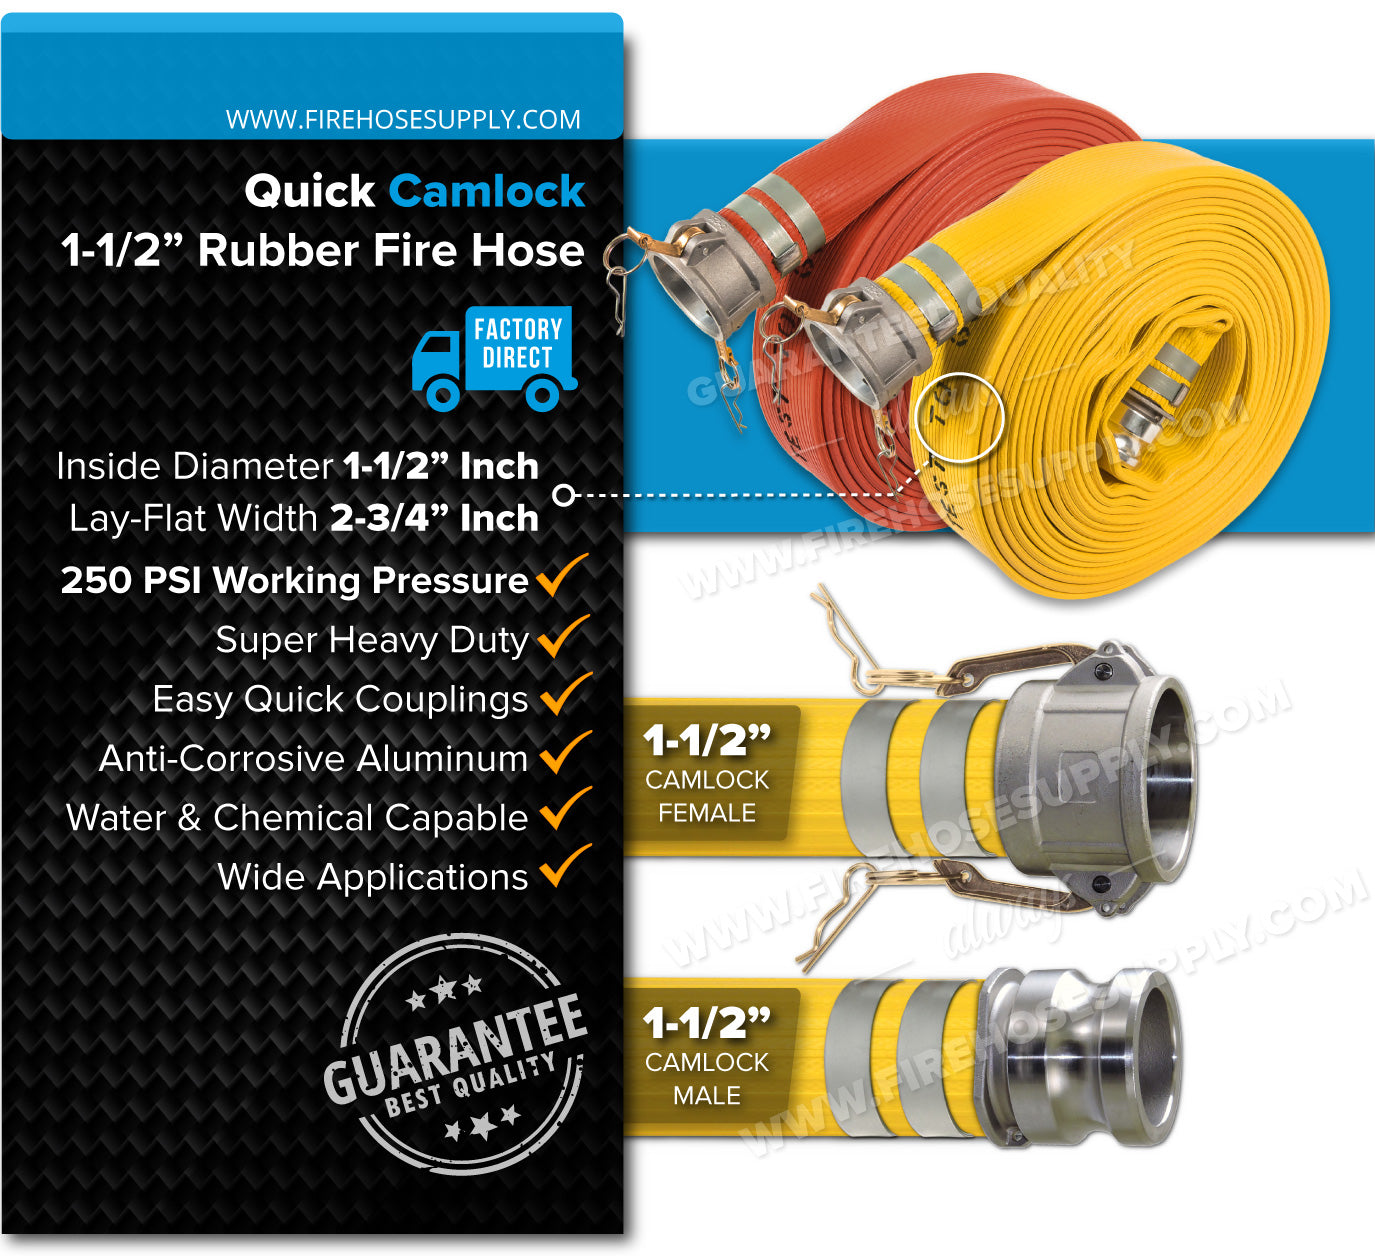 1-1-2 Inch Rubber Nitrile Camlock Fire Hose Overview